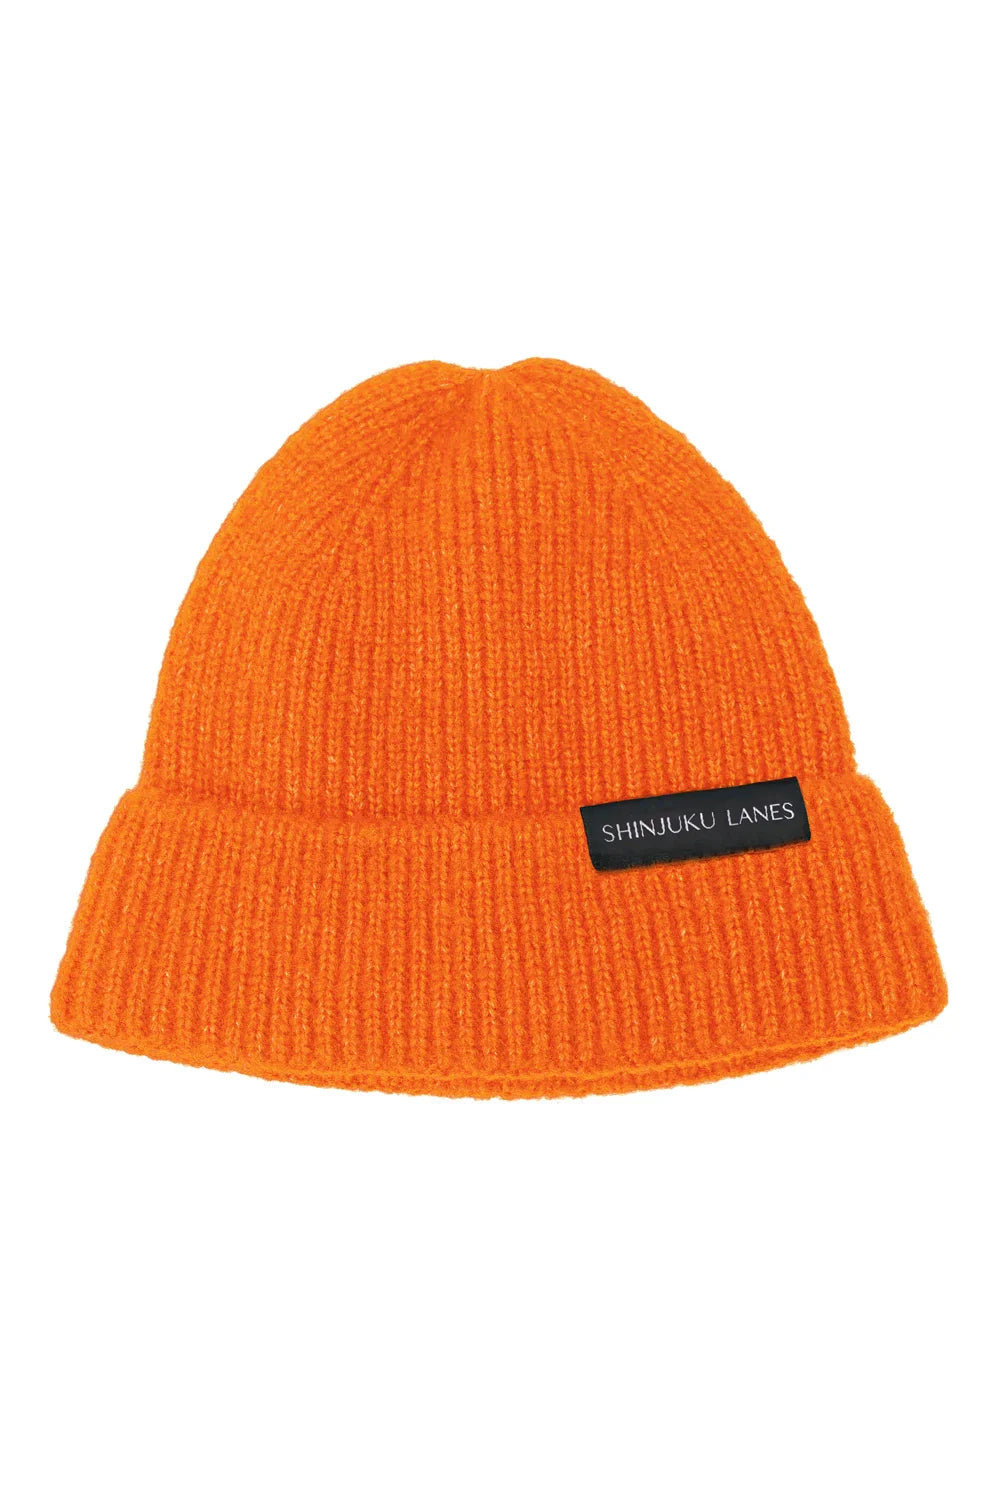 Product picture of Origin Ribbed Beanie - Flecked Orange